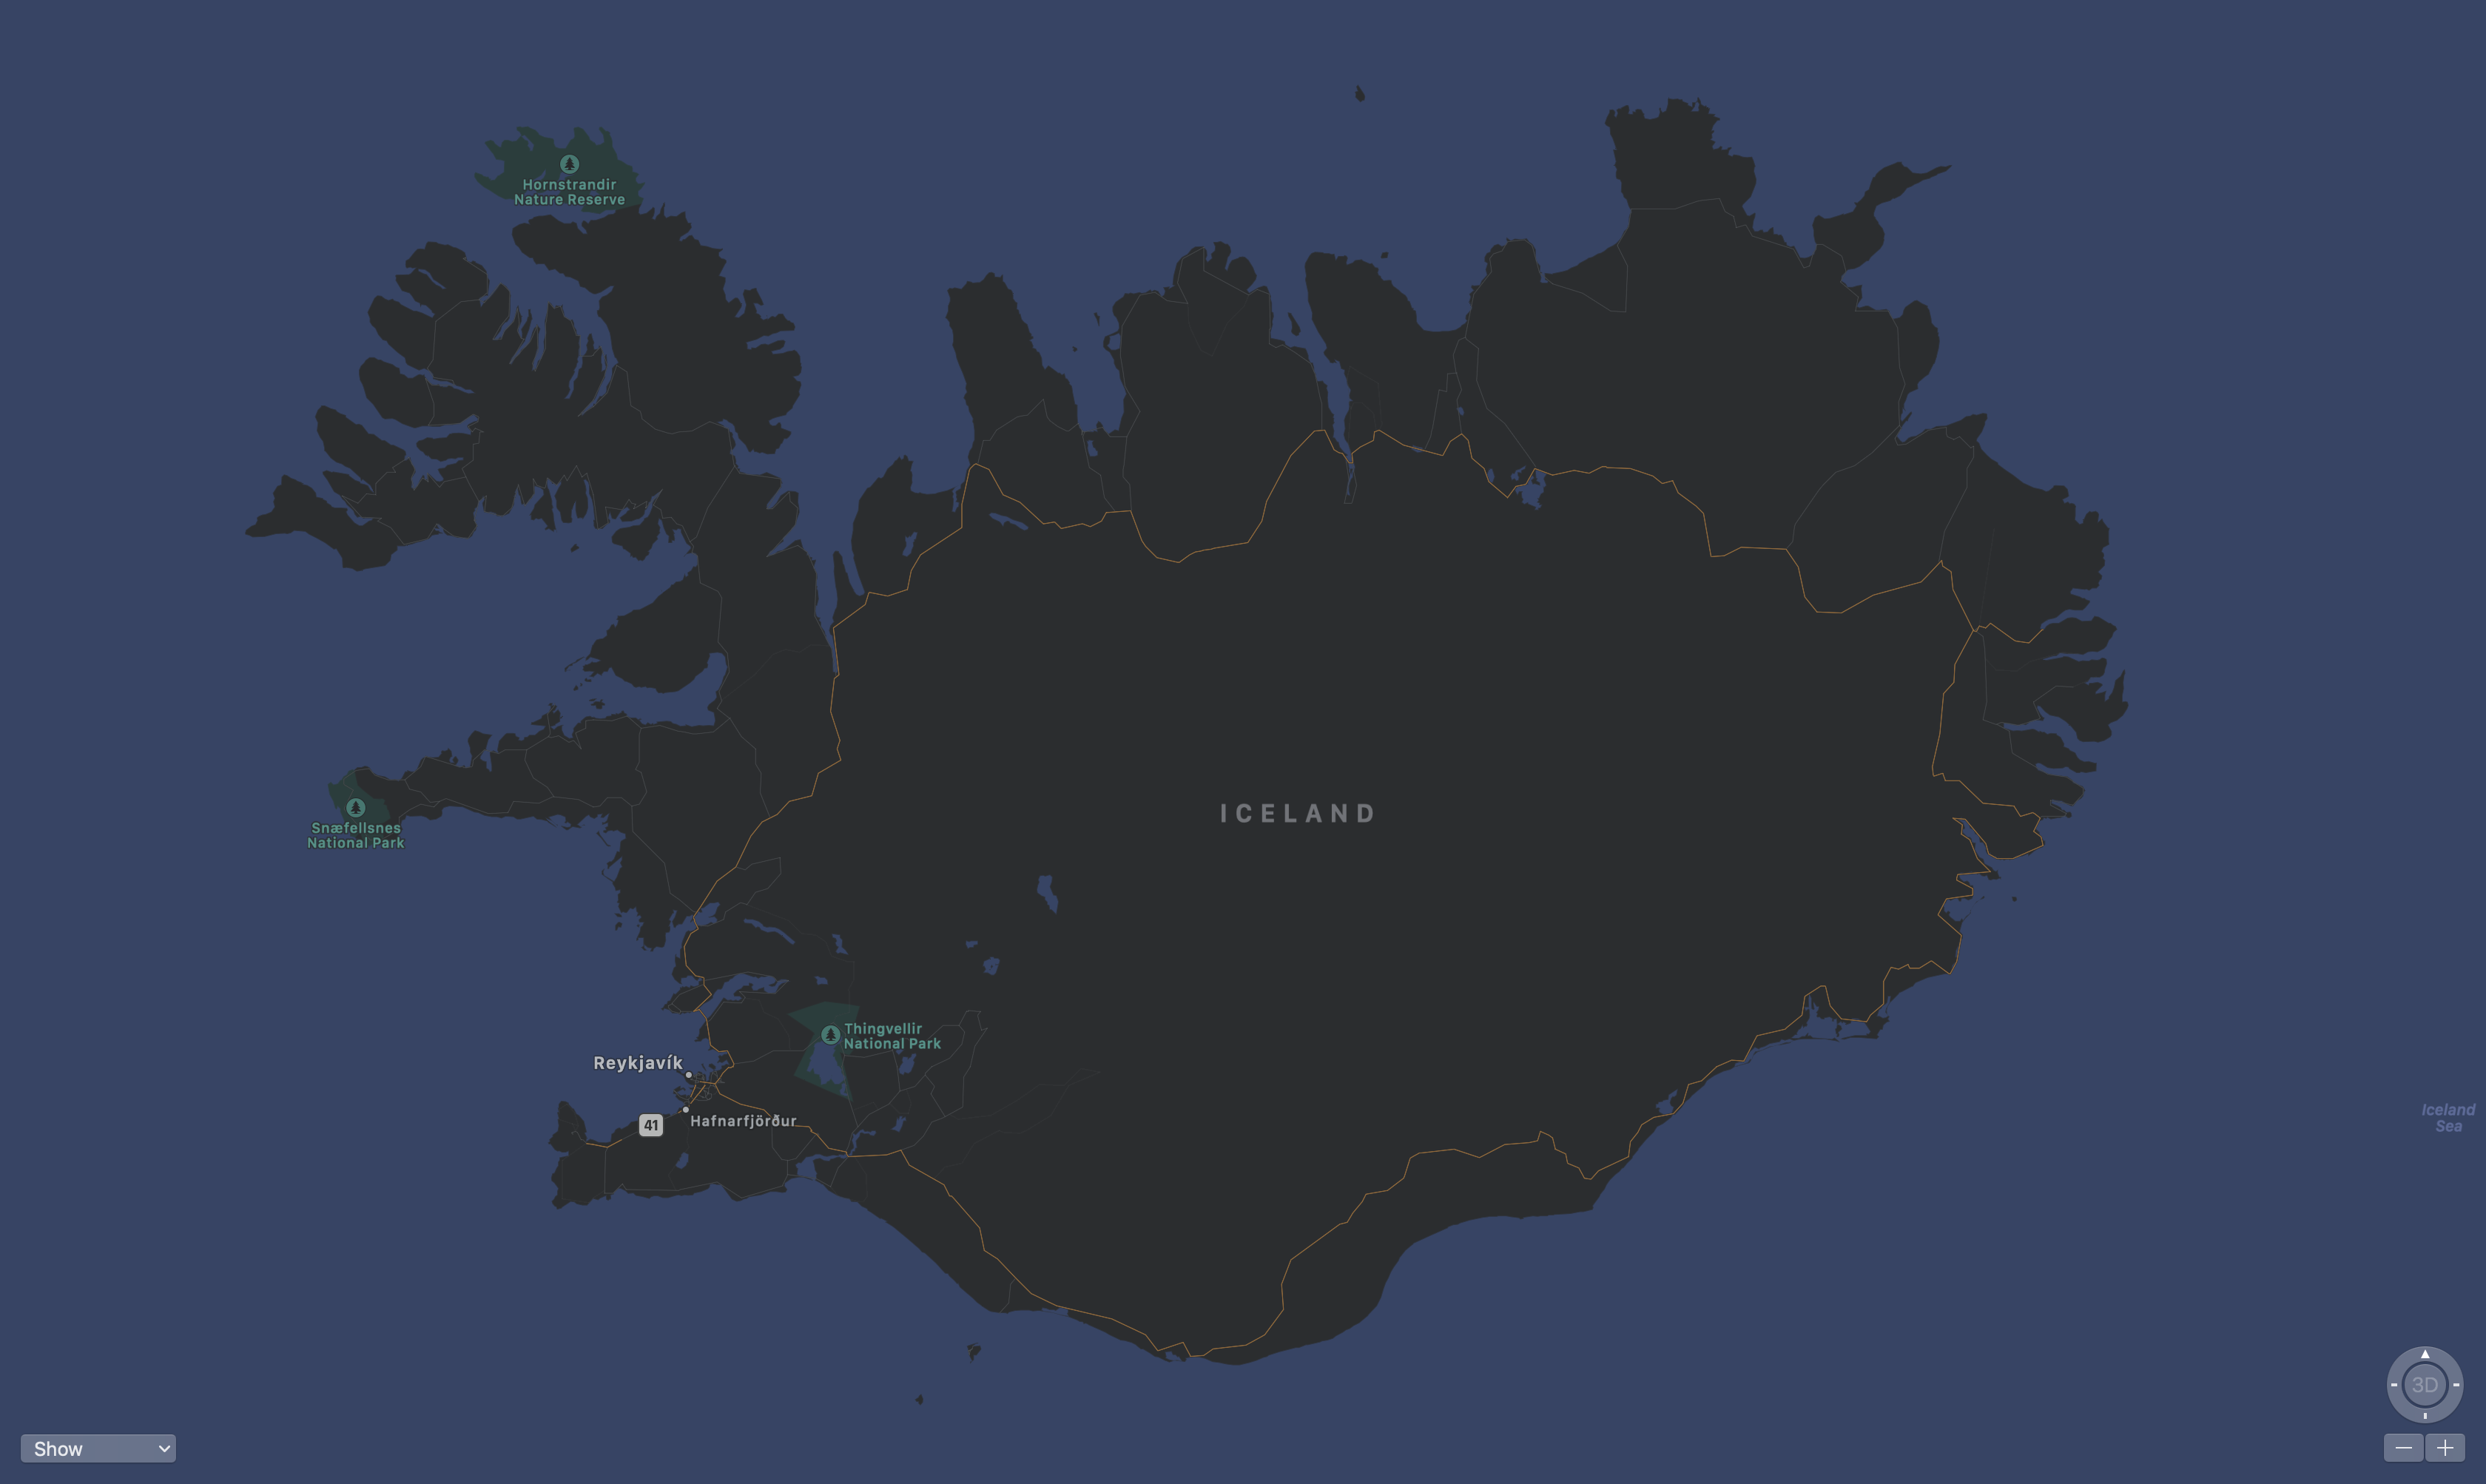 map screen shot of Iceland